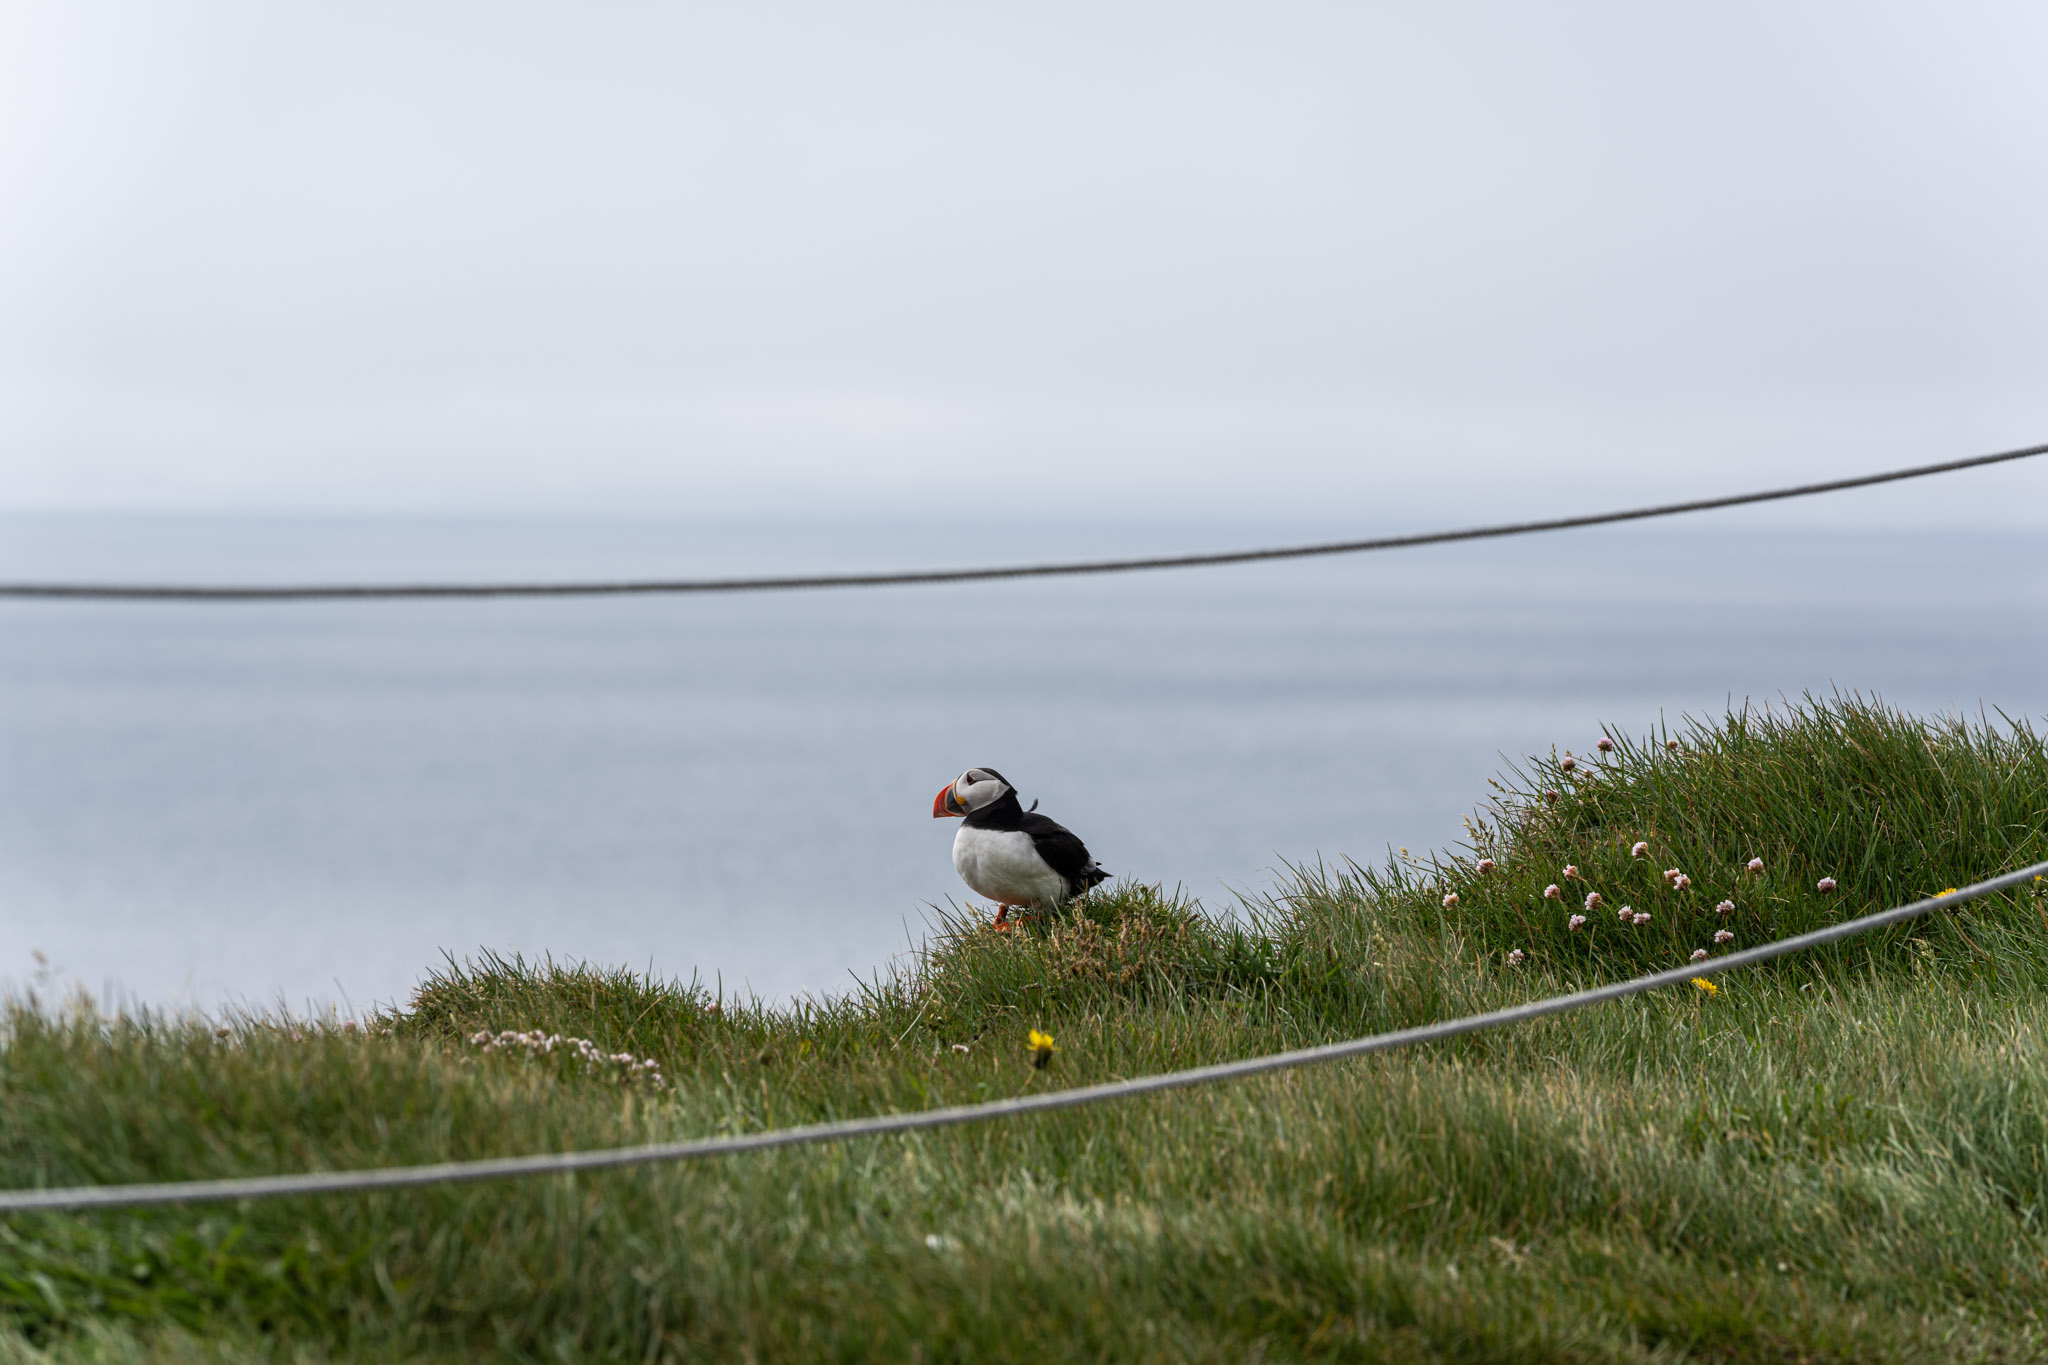 a bird standing on grass by a wire